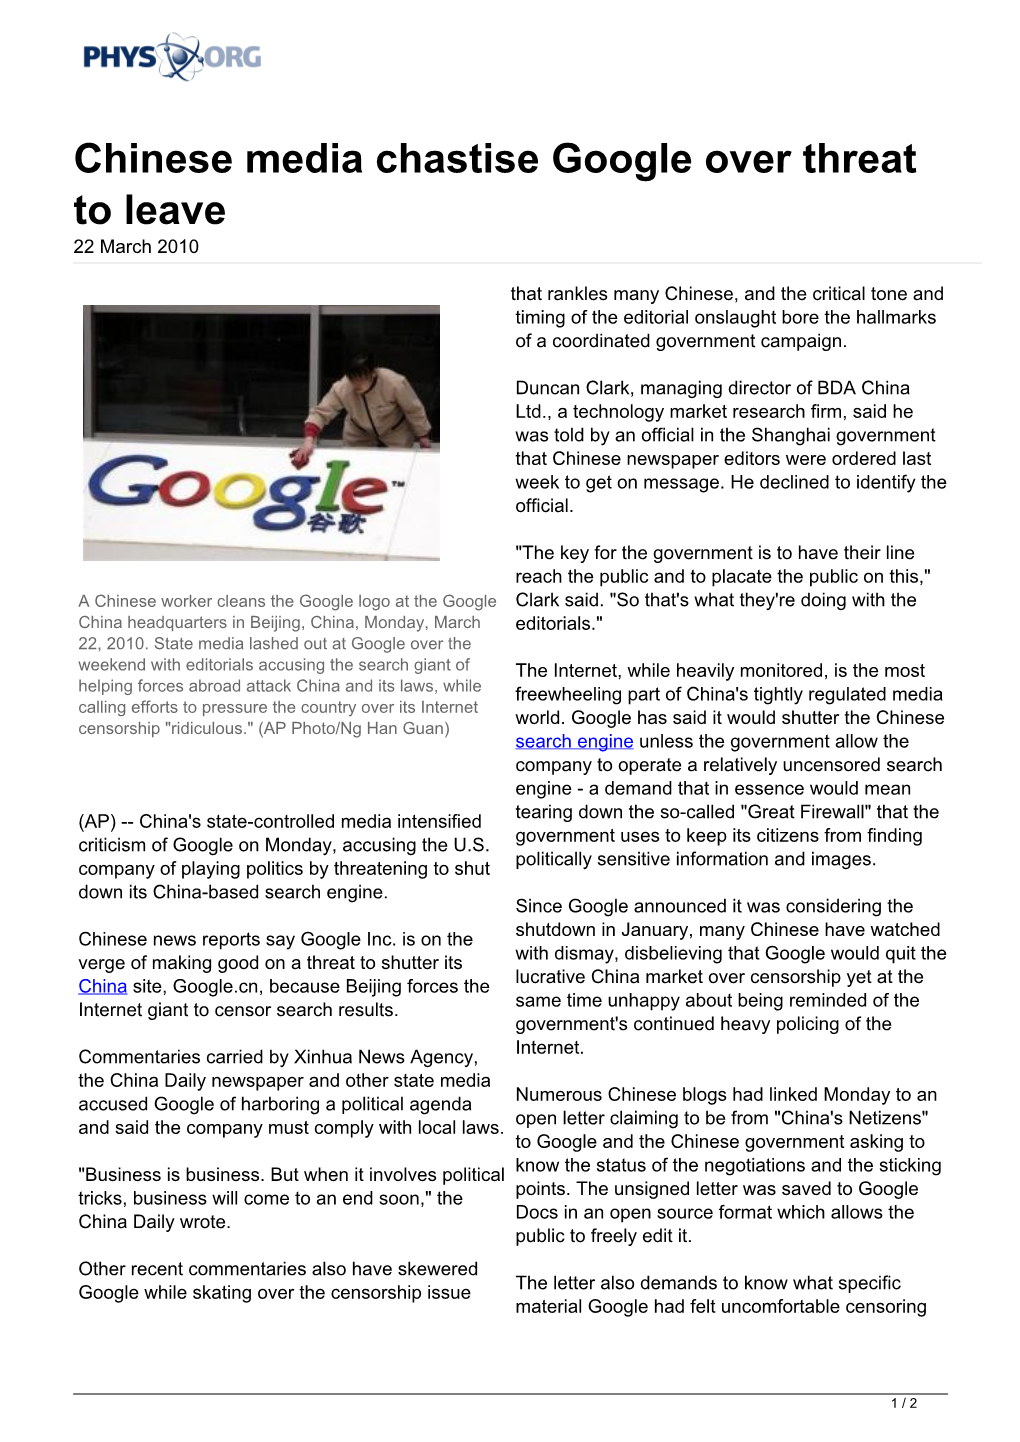 Chinese Media Chastise Google Over Threat to Leave 22 March 2010